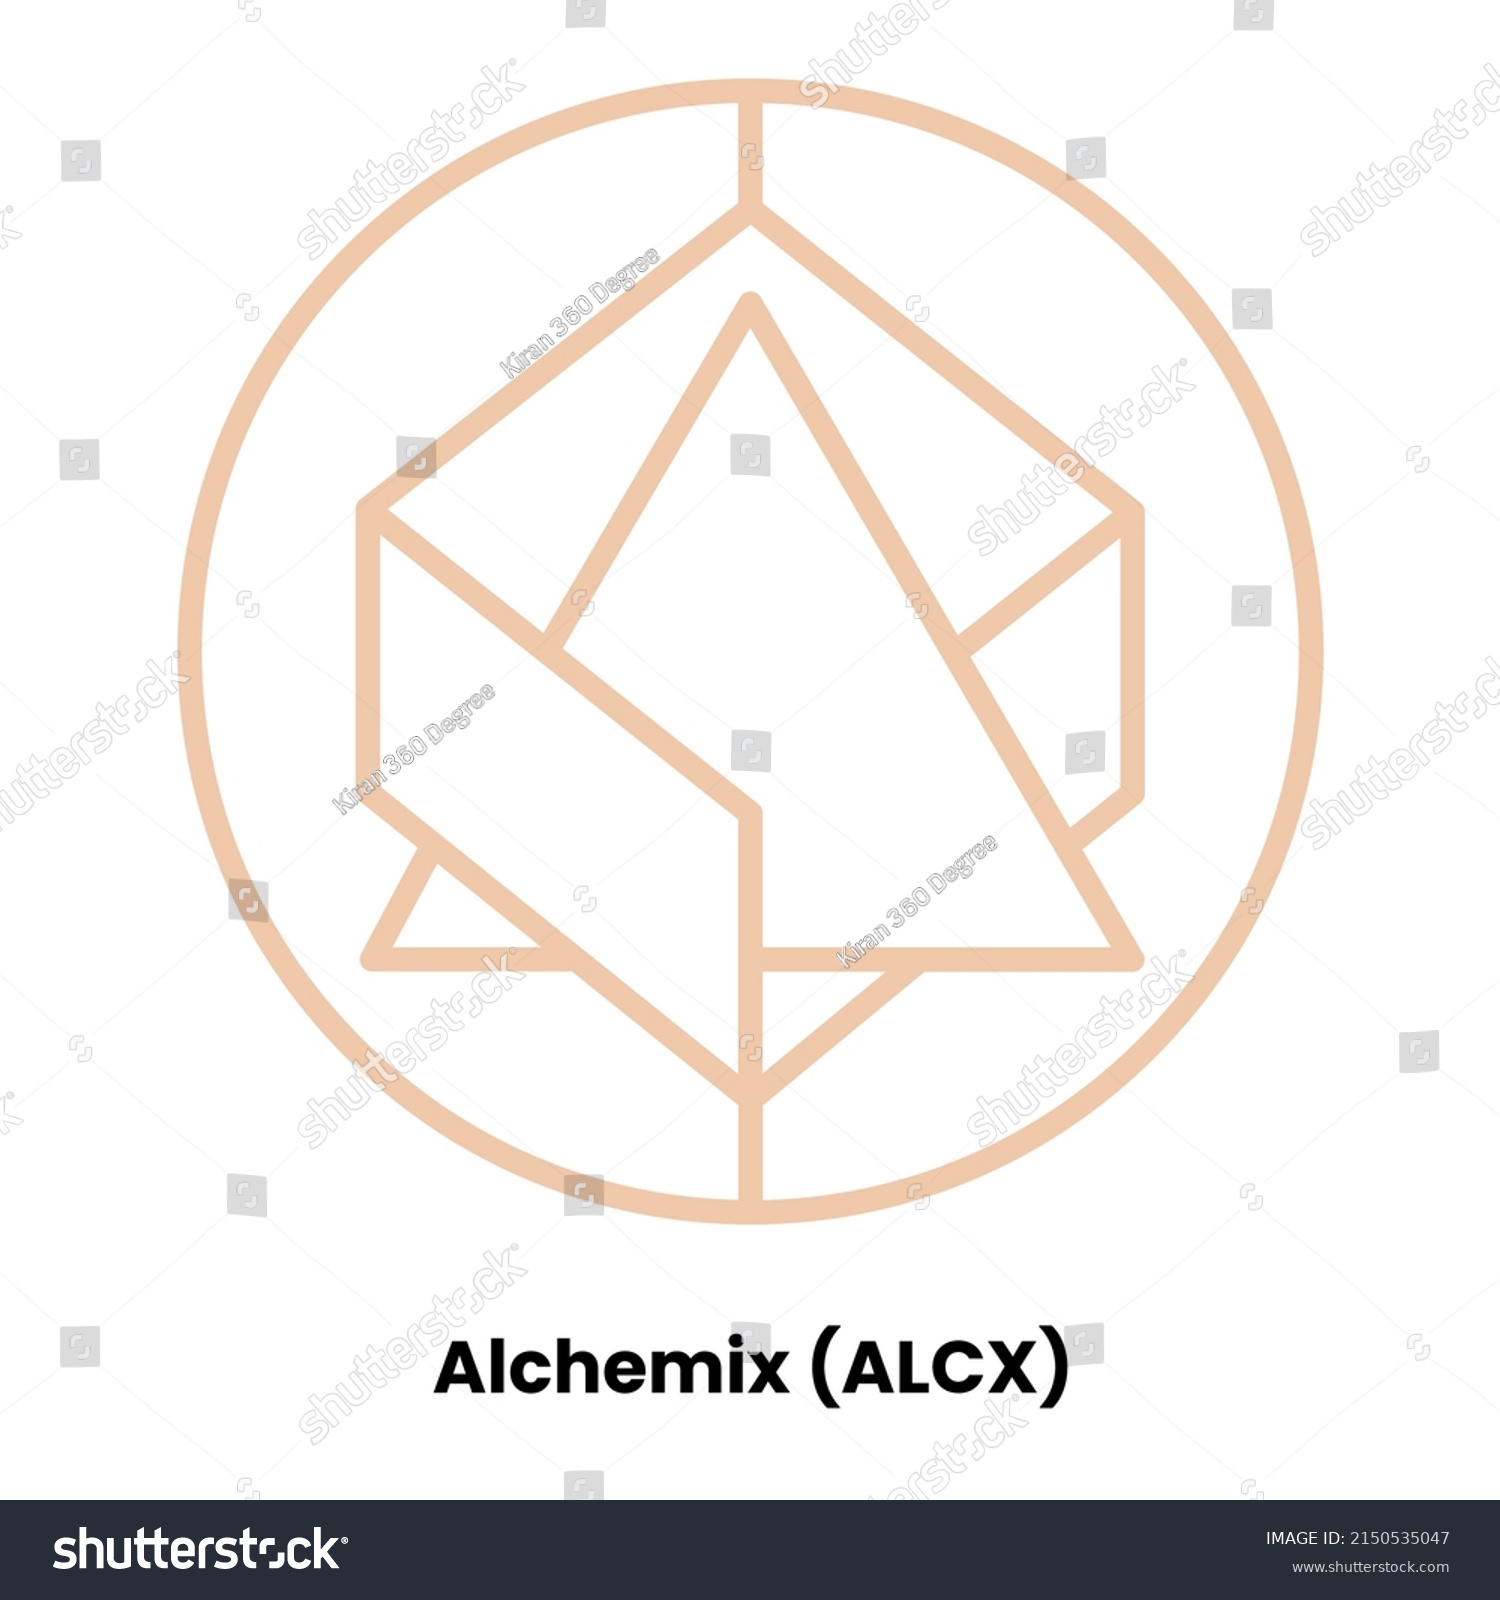 SVG of Alchemix crypto currency with symbol ALCX. Crypto logo vector illustration for stickers, icon, badges, labels and emblem designs. svg